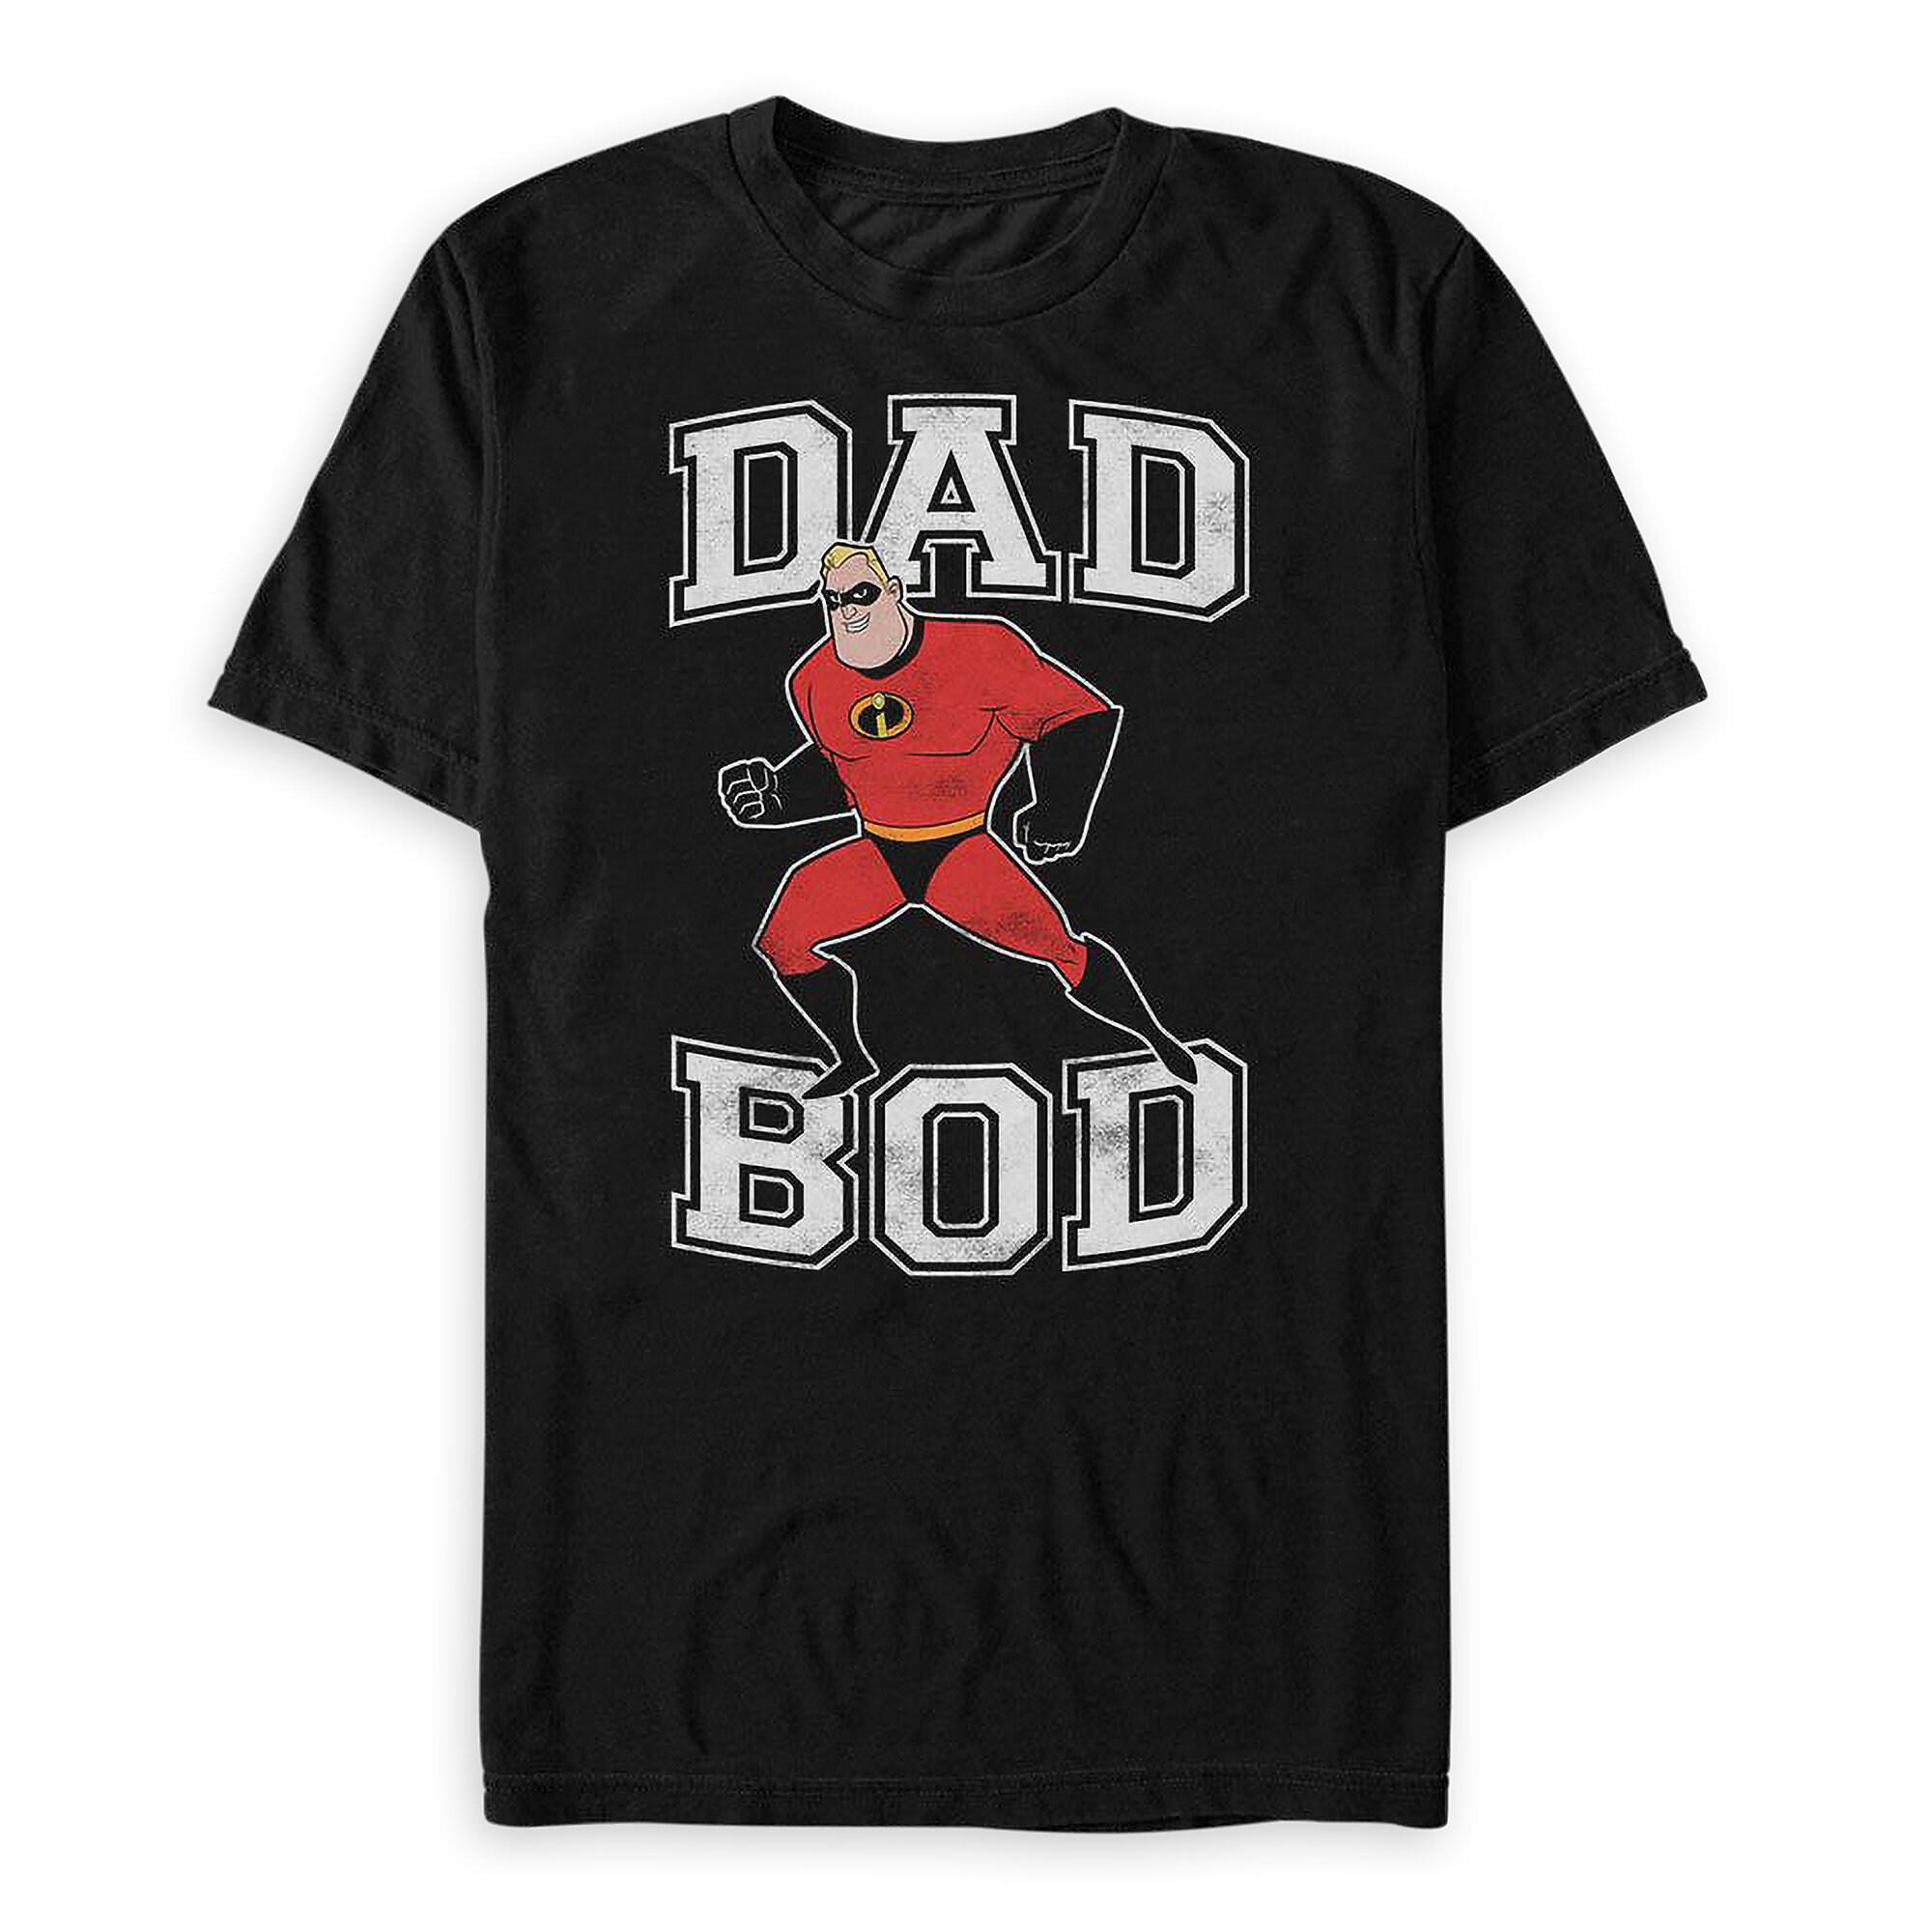 Mr. Incredible ''Dad Bod'' T-Shirt for Men is available onli